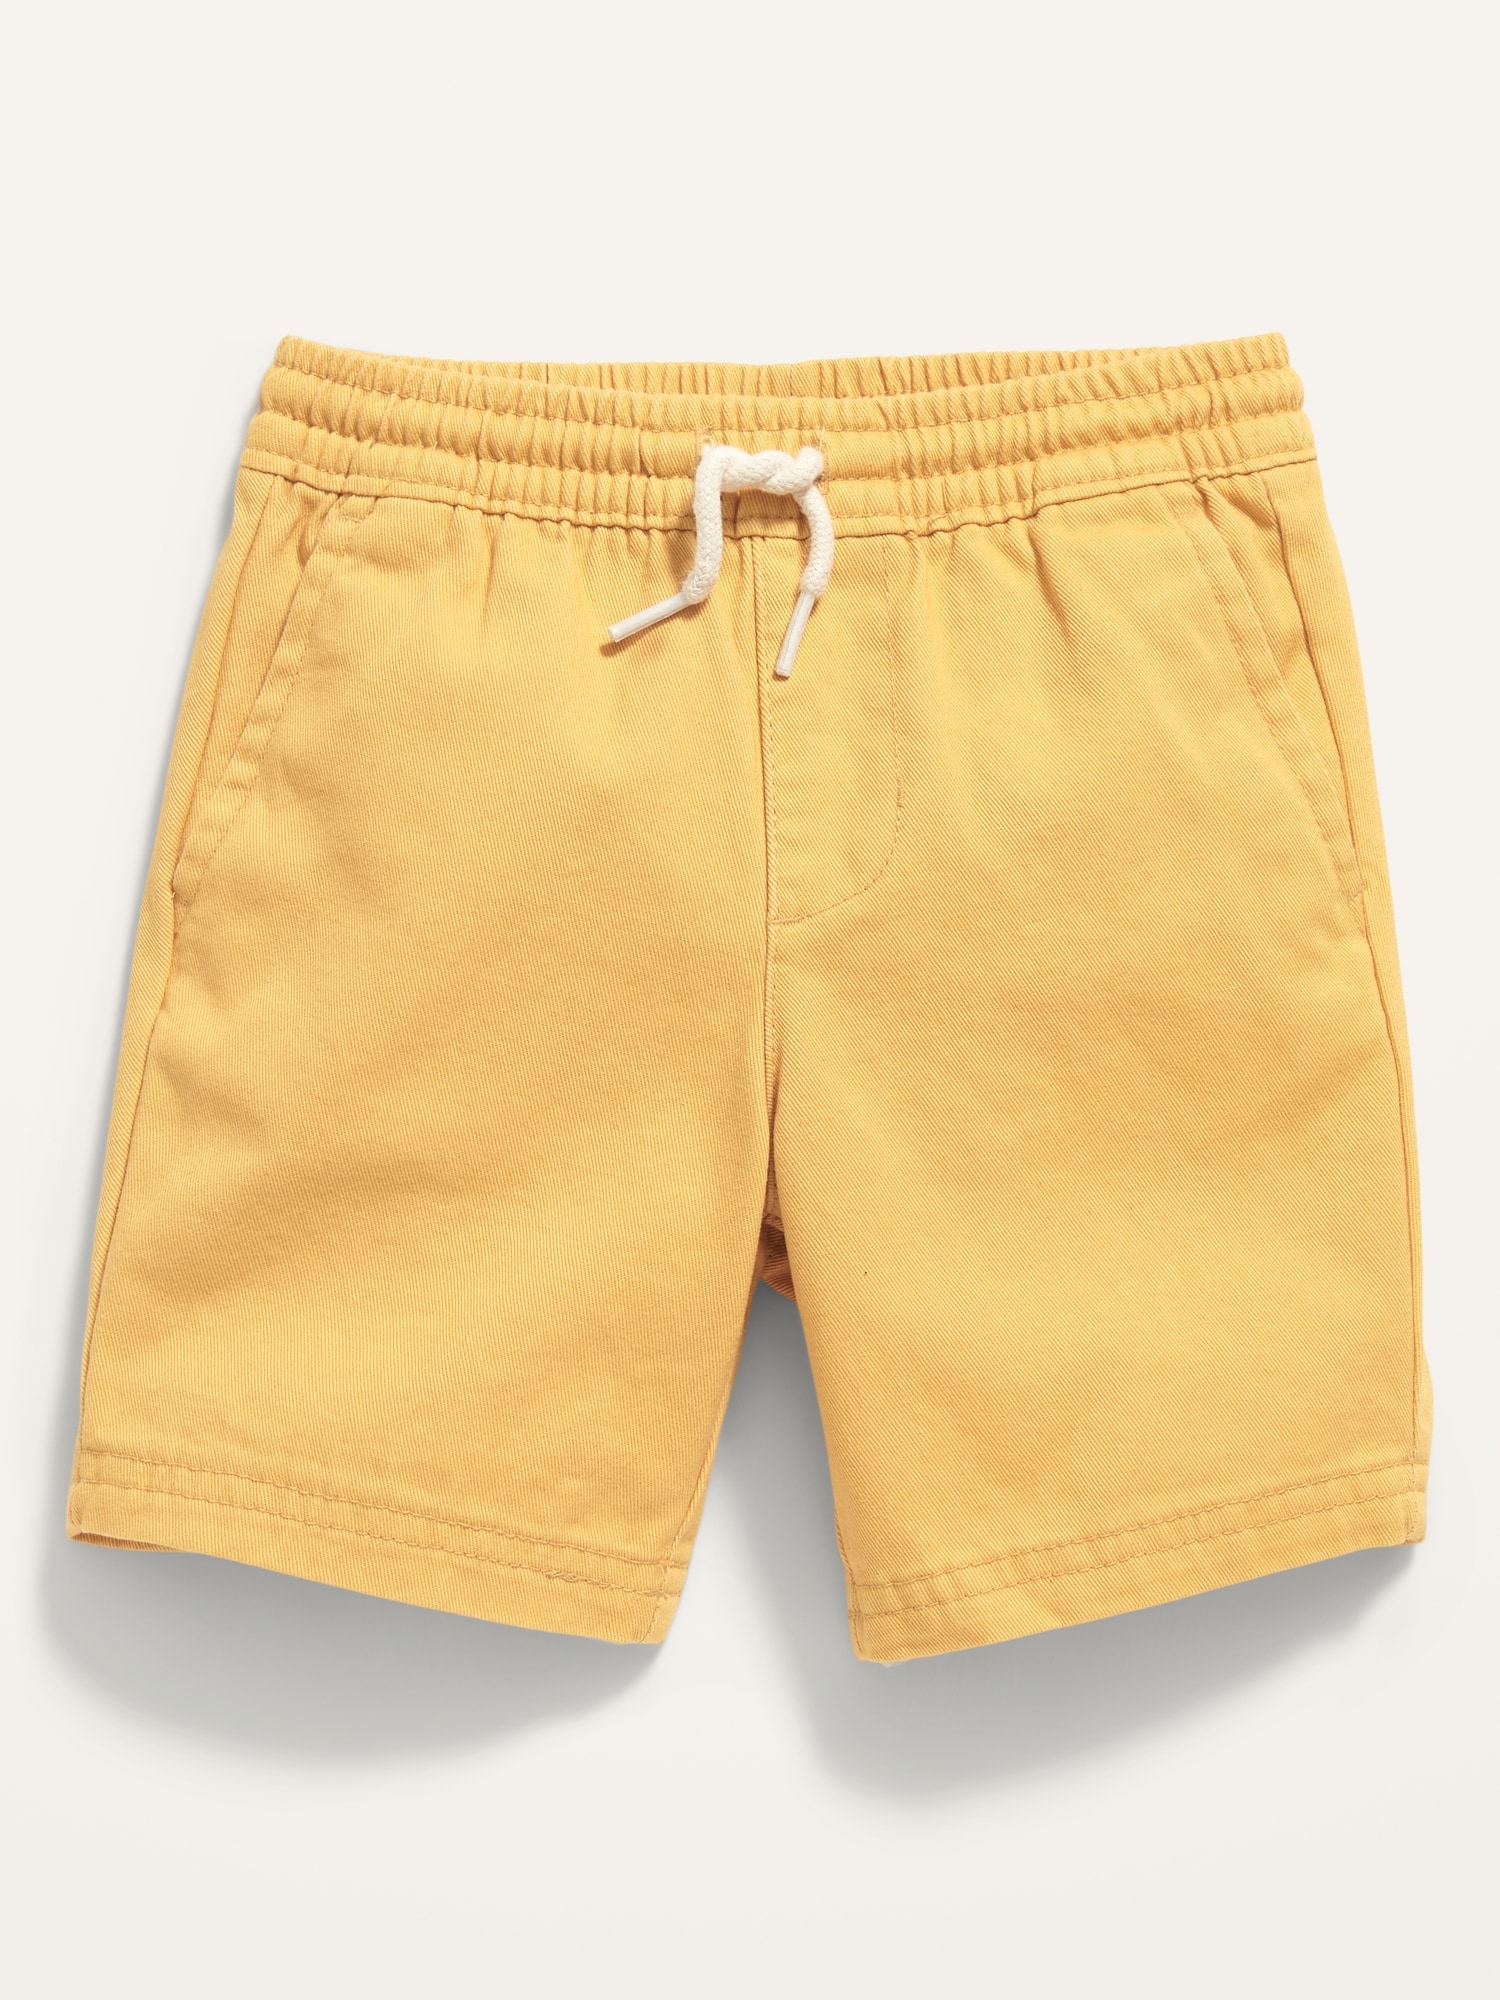 Pull-On Twill Shorts - Solids